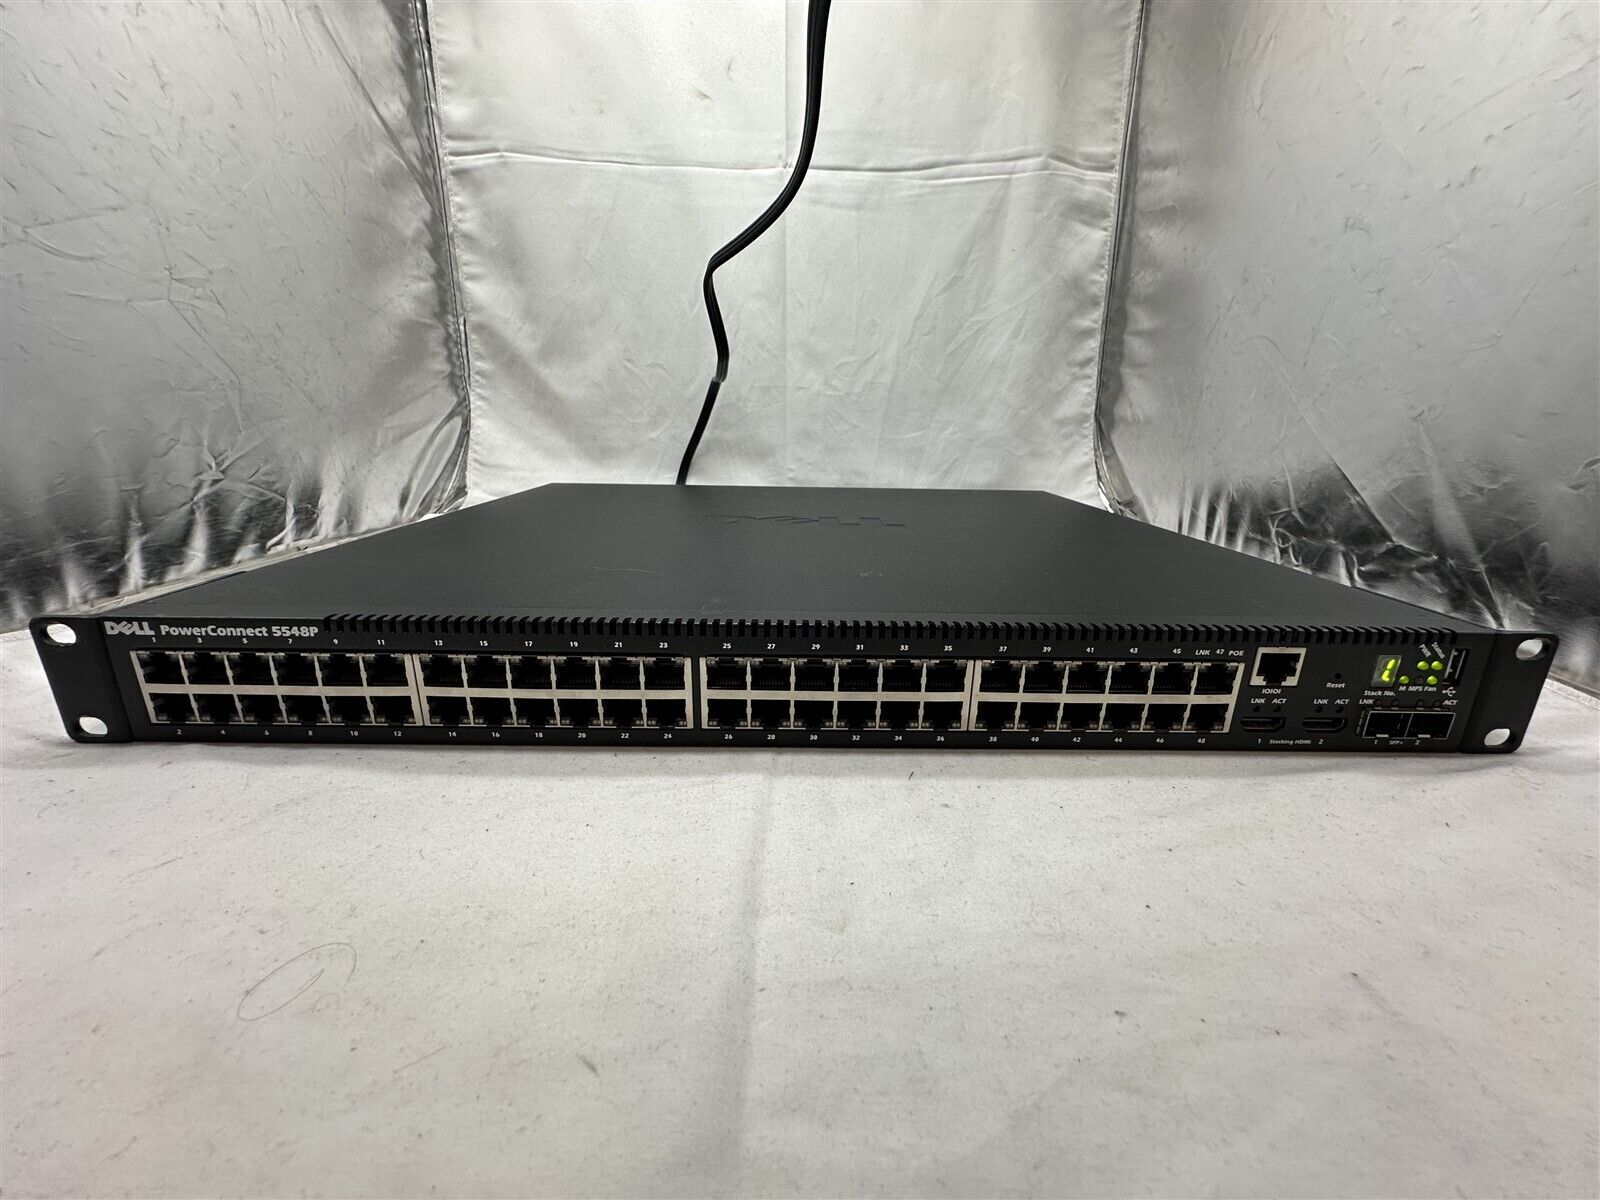 Dell PowerConnect 5548P 48-Port Gigabyte PoE Ethernet Network Switch